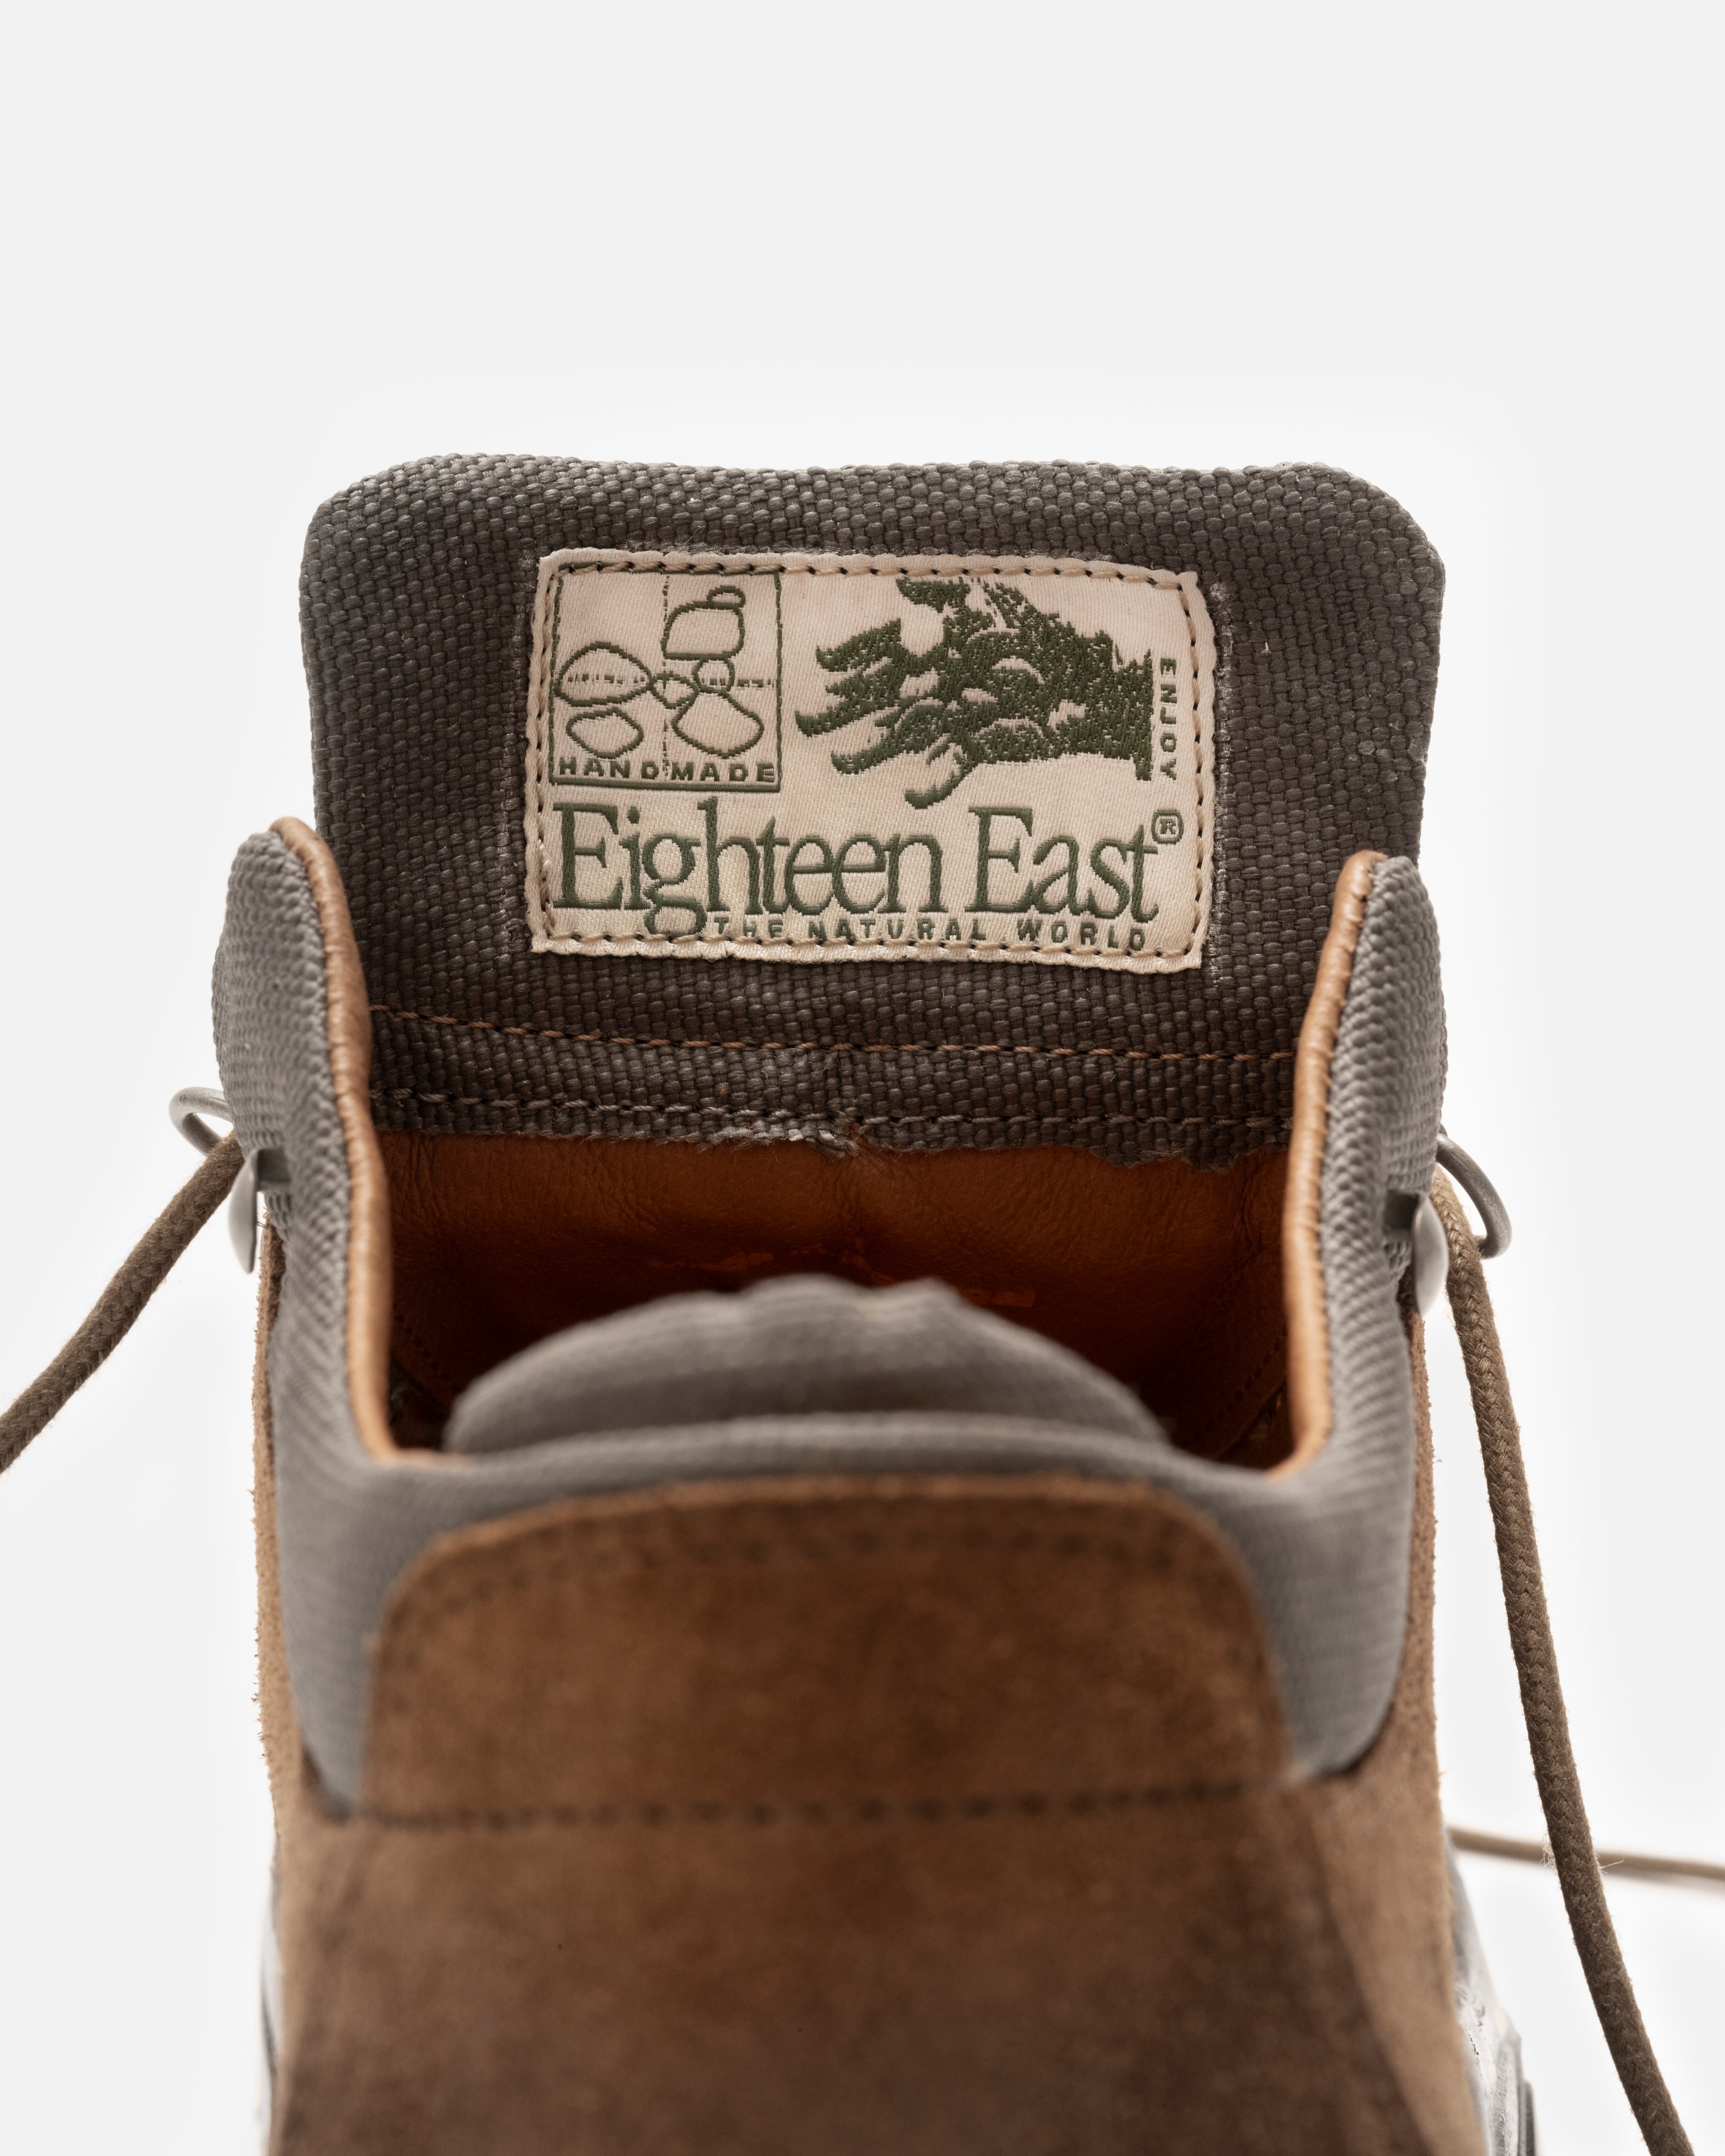 OAKLEDGE HIKER LOW BOOT - ALMOND ITALIAN SUEDE WITH SAGE CORDURA